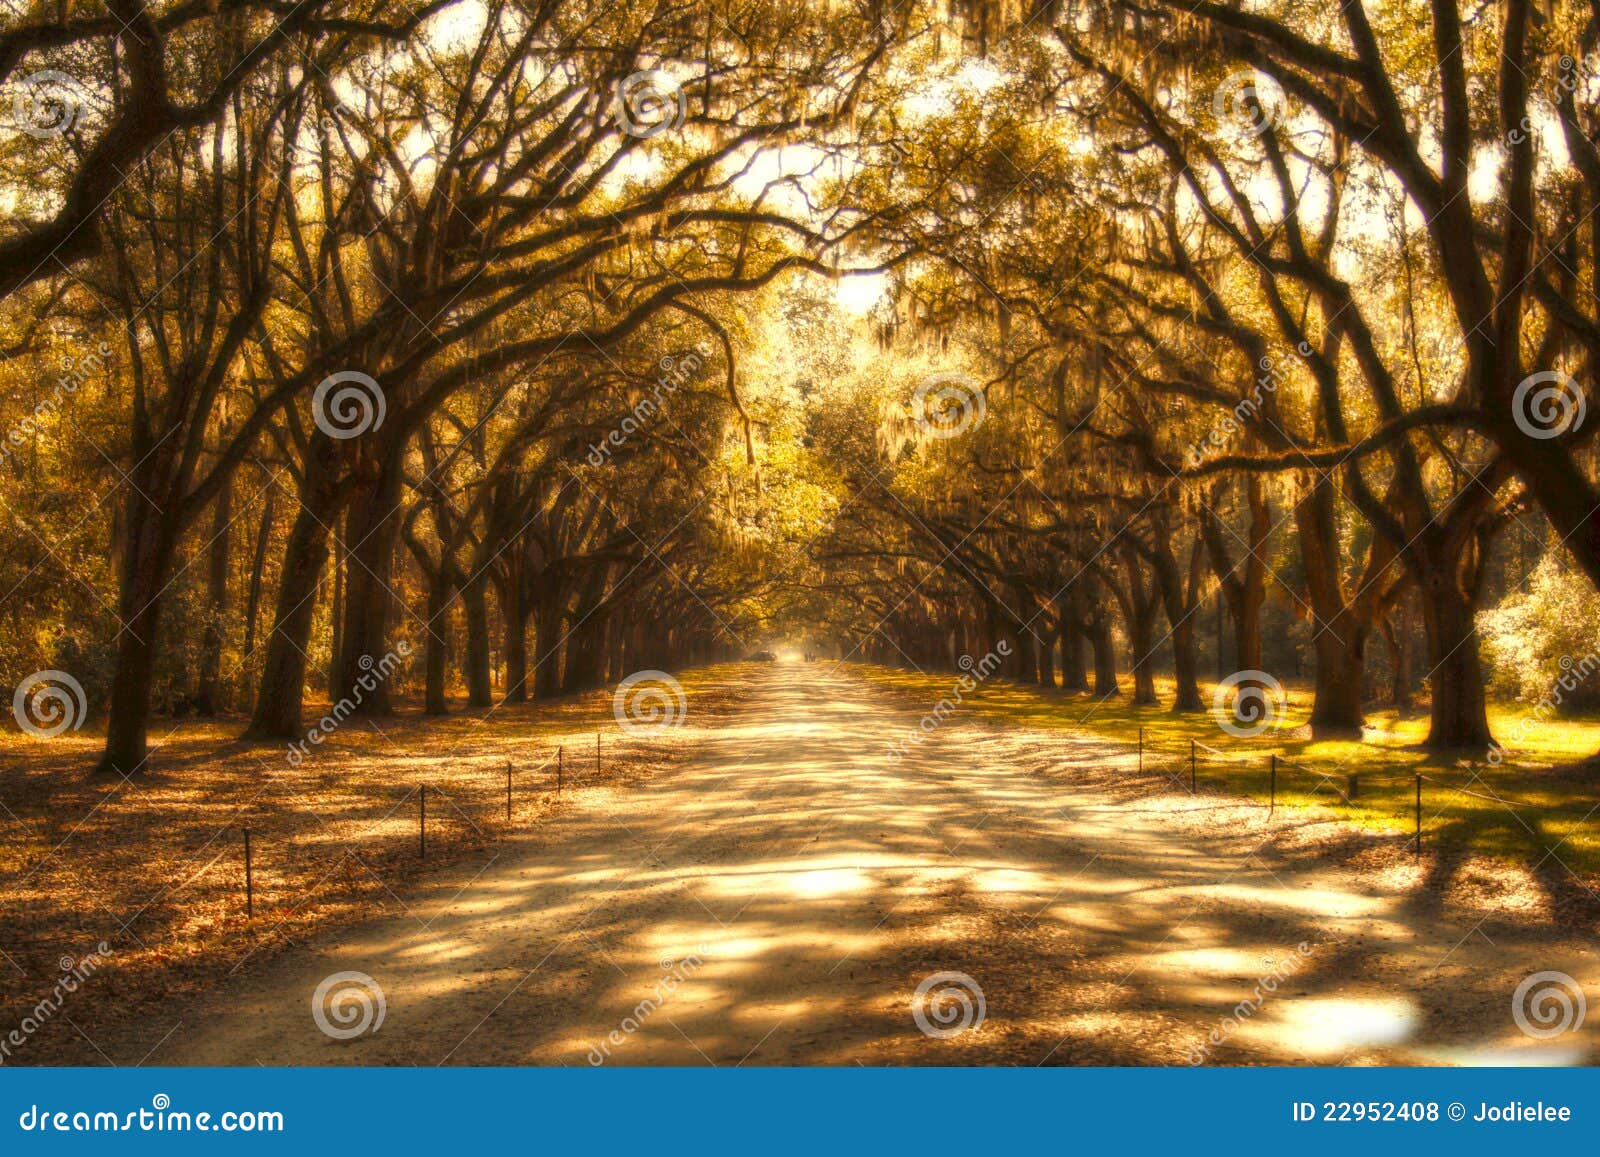 surreal ghostly tree covered road